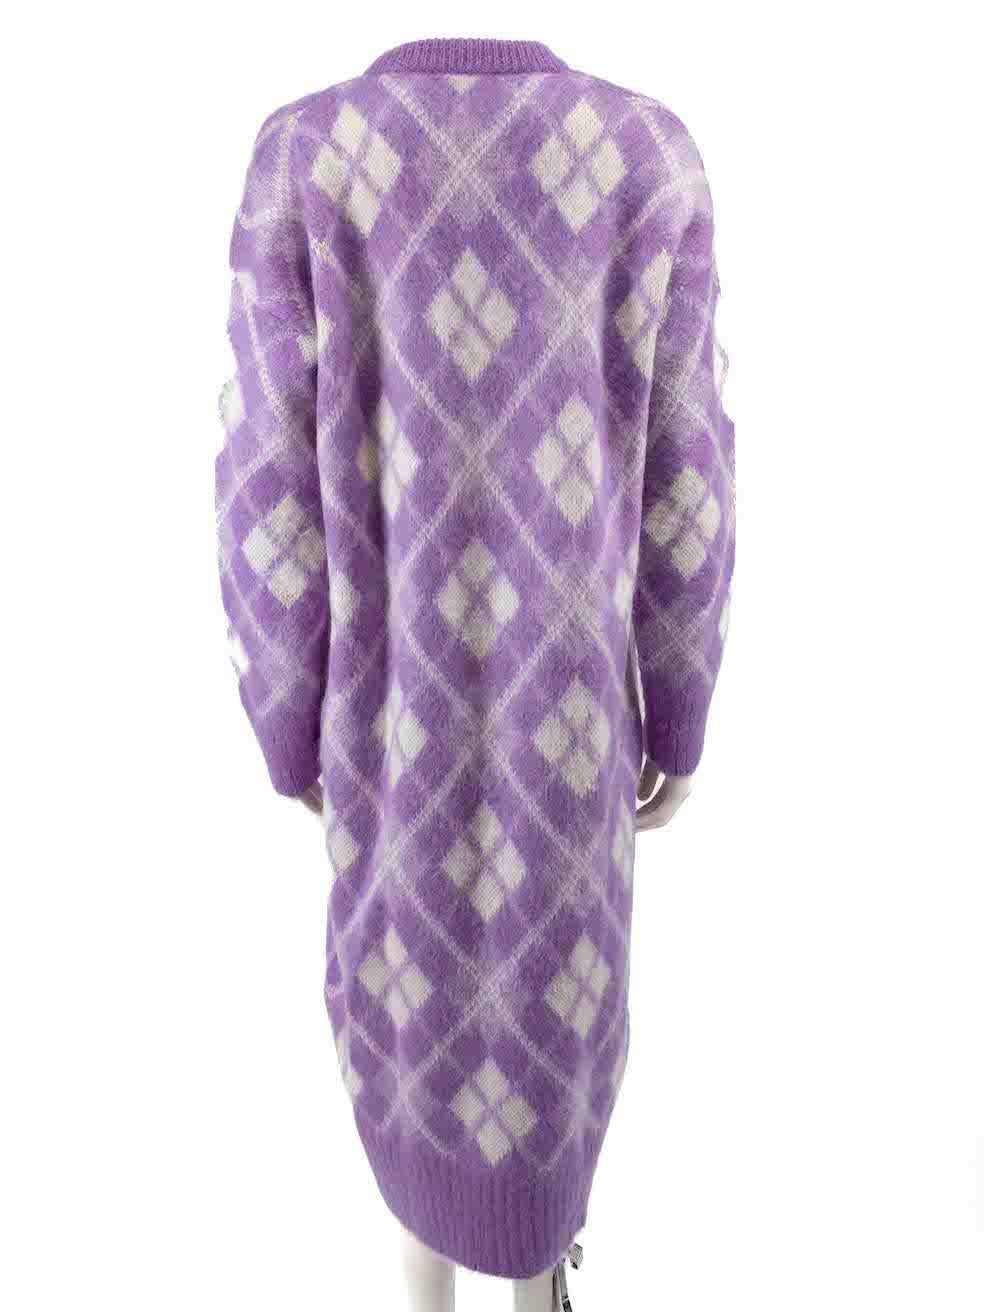 Miu Miu Purple Mohair Oversized Argyle Cardigan Size XXS In Good Condition For Sale In London, GB